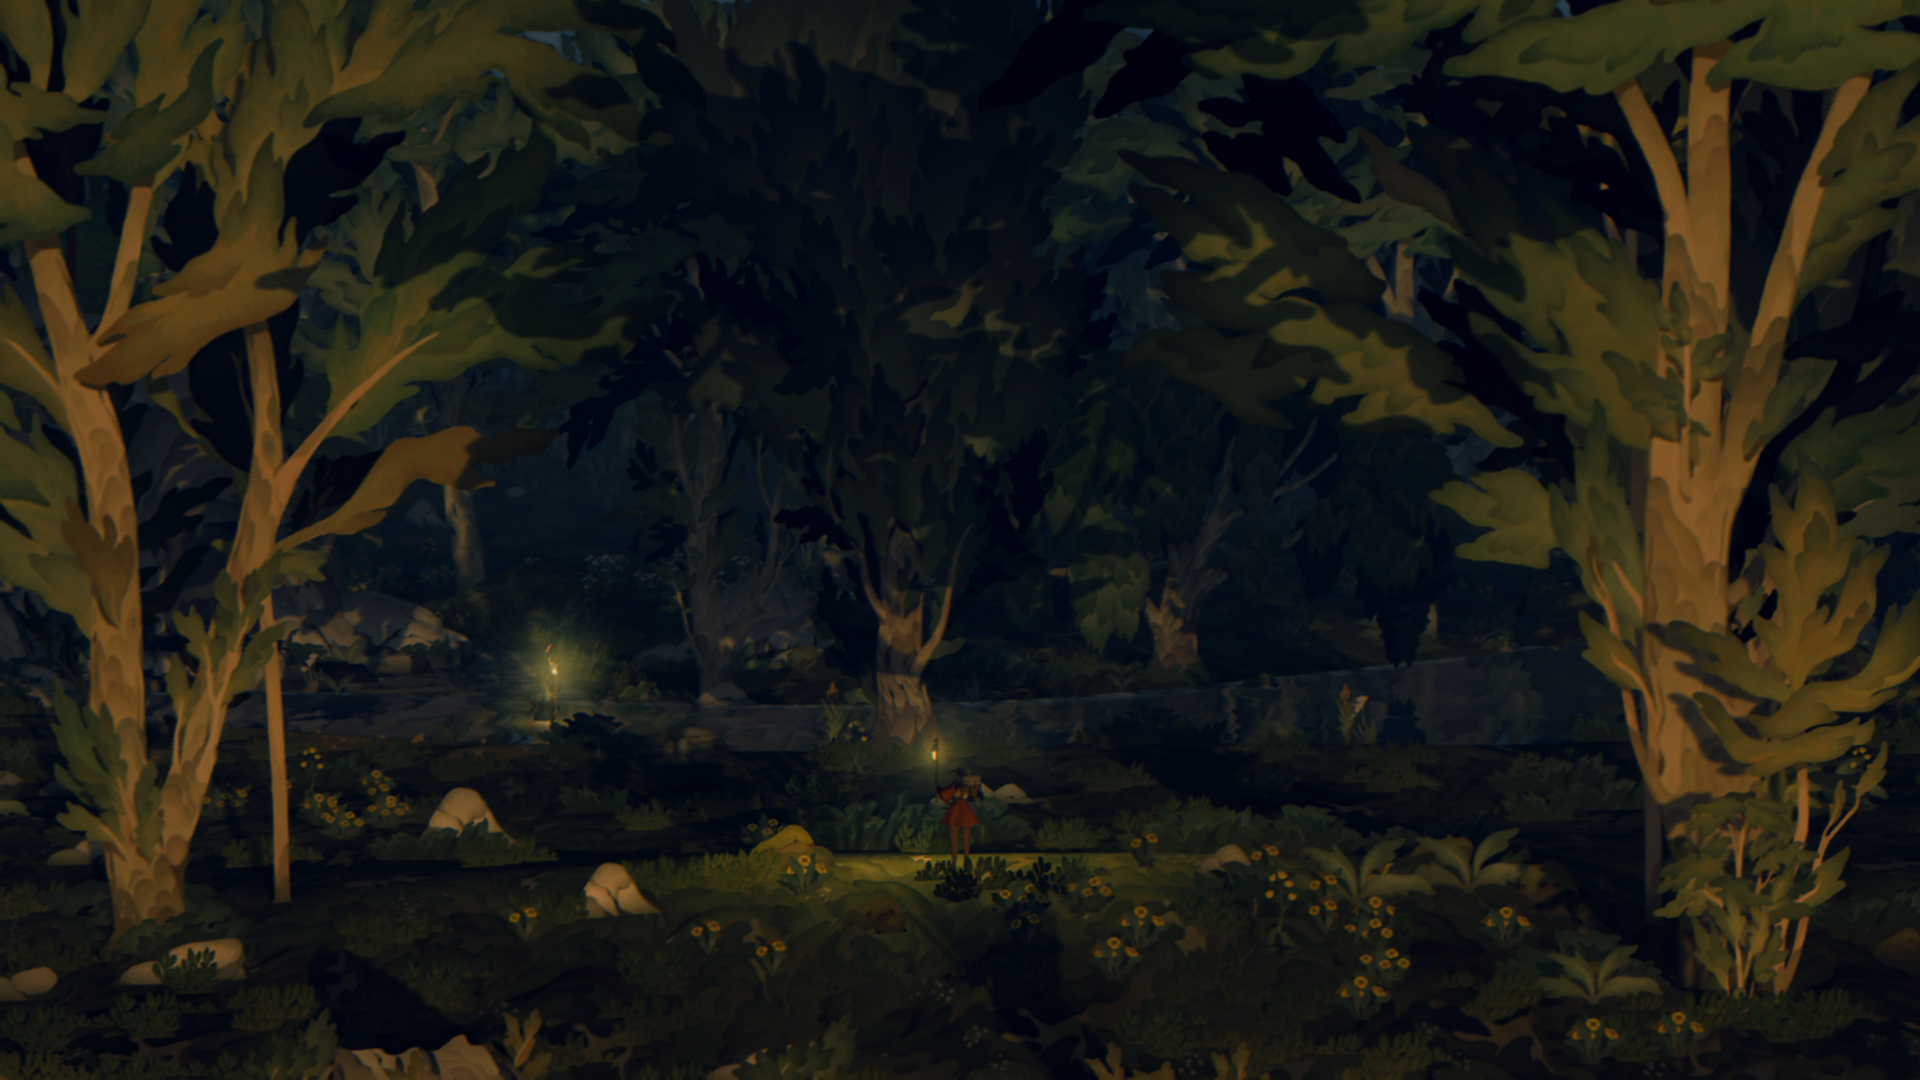 A night scene from the game Book of Travels showing two characters navigating a forest, one walking on a trail with a lantern and the other character walking in a river beside the trail. The scene underscores the game's element of exploration and adventure under the stars.